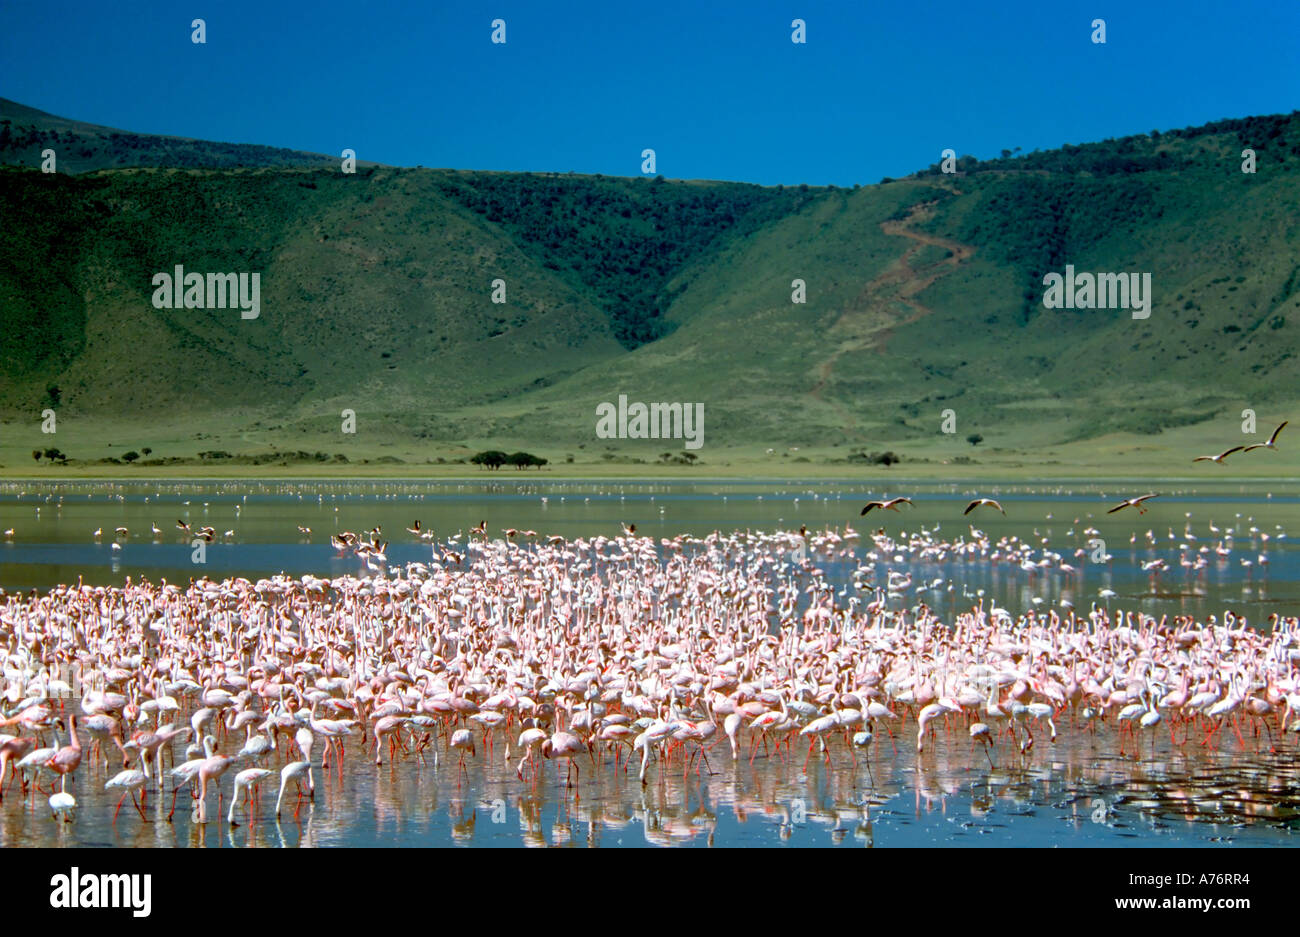 A wide angle view of a large flock of Lesser flamingoes (Phoenicopterus minor) feeding off the algae at a lake. Stock Photo